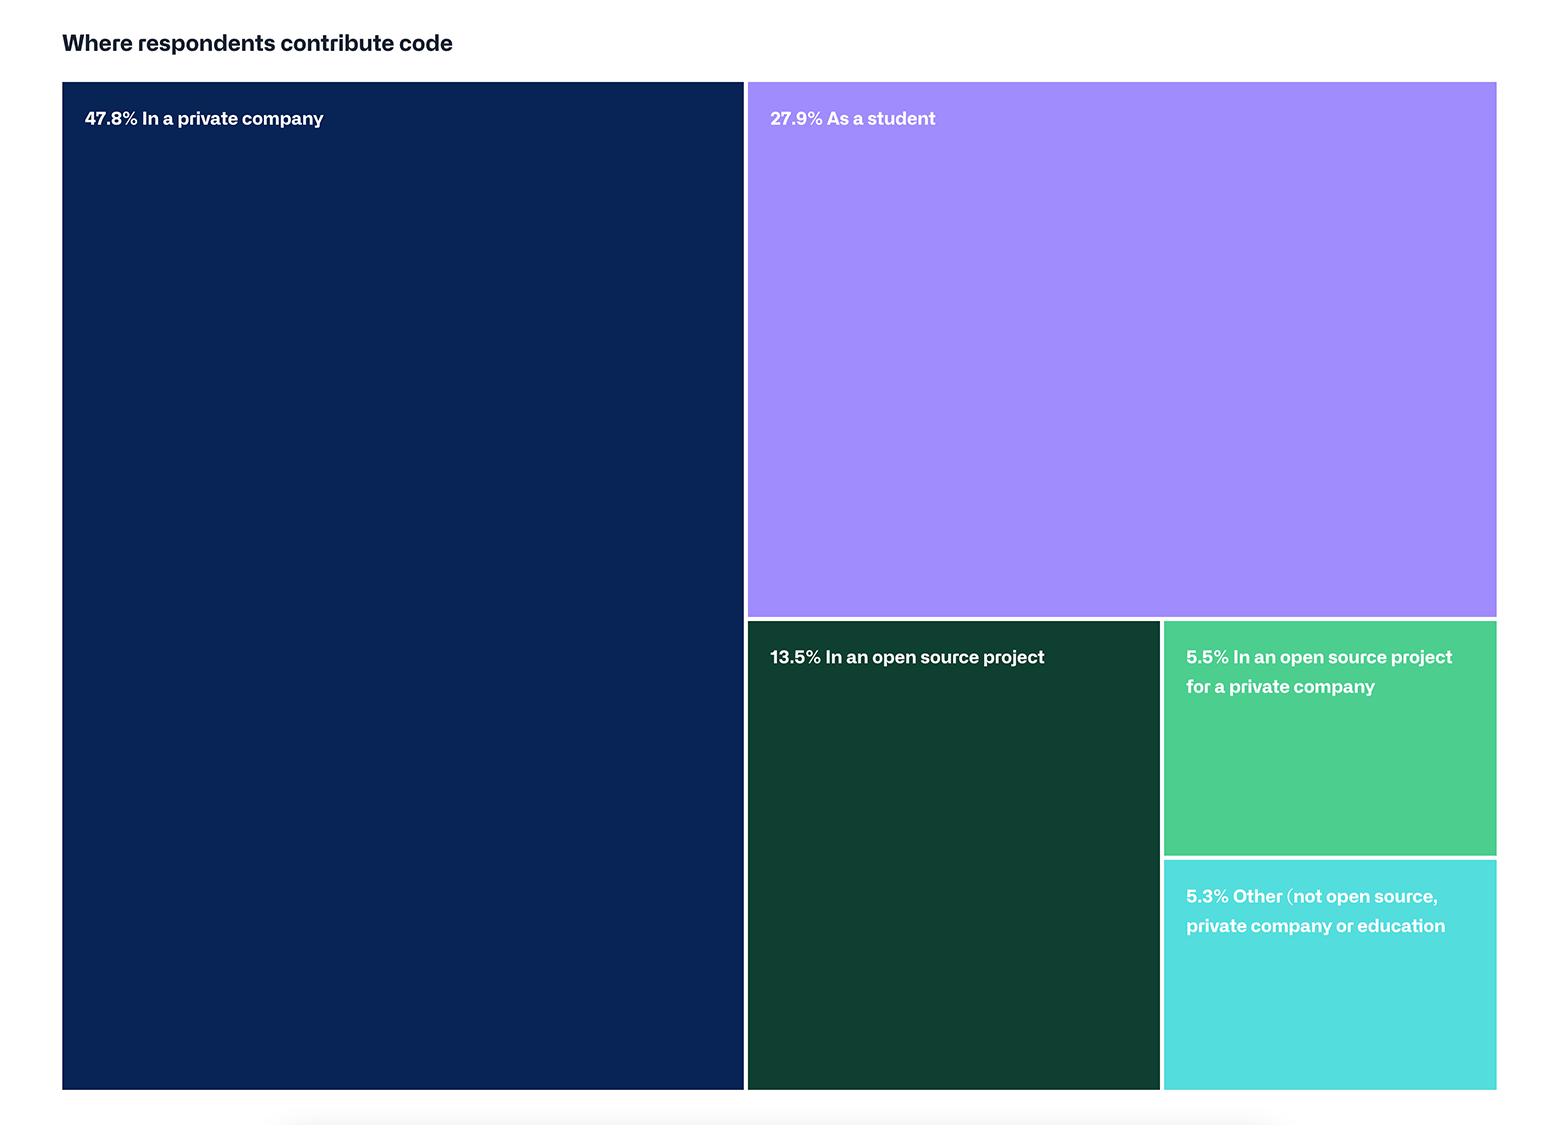 A treemap for GitHub's Octoverse report illustrates the different sectors to which respondents contributed code during 2021. Each sector is represented by a rectangle.  The largest rectangles are placed in the top left, followed by progressively smaller rectangles. Each rectangle is a different color.